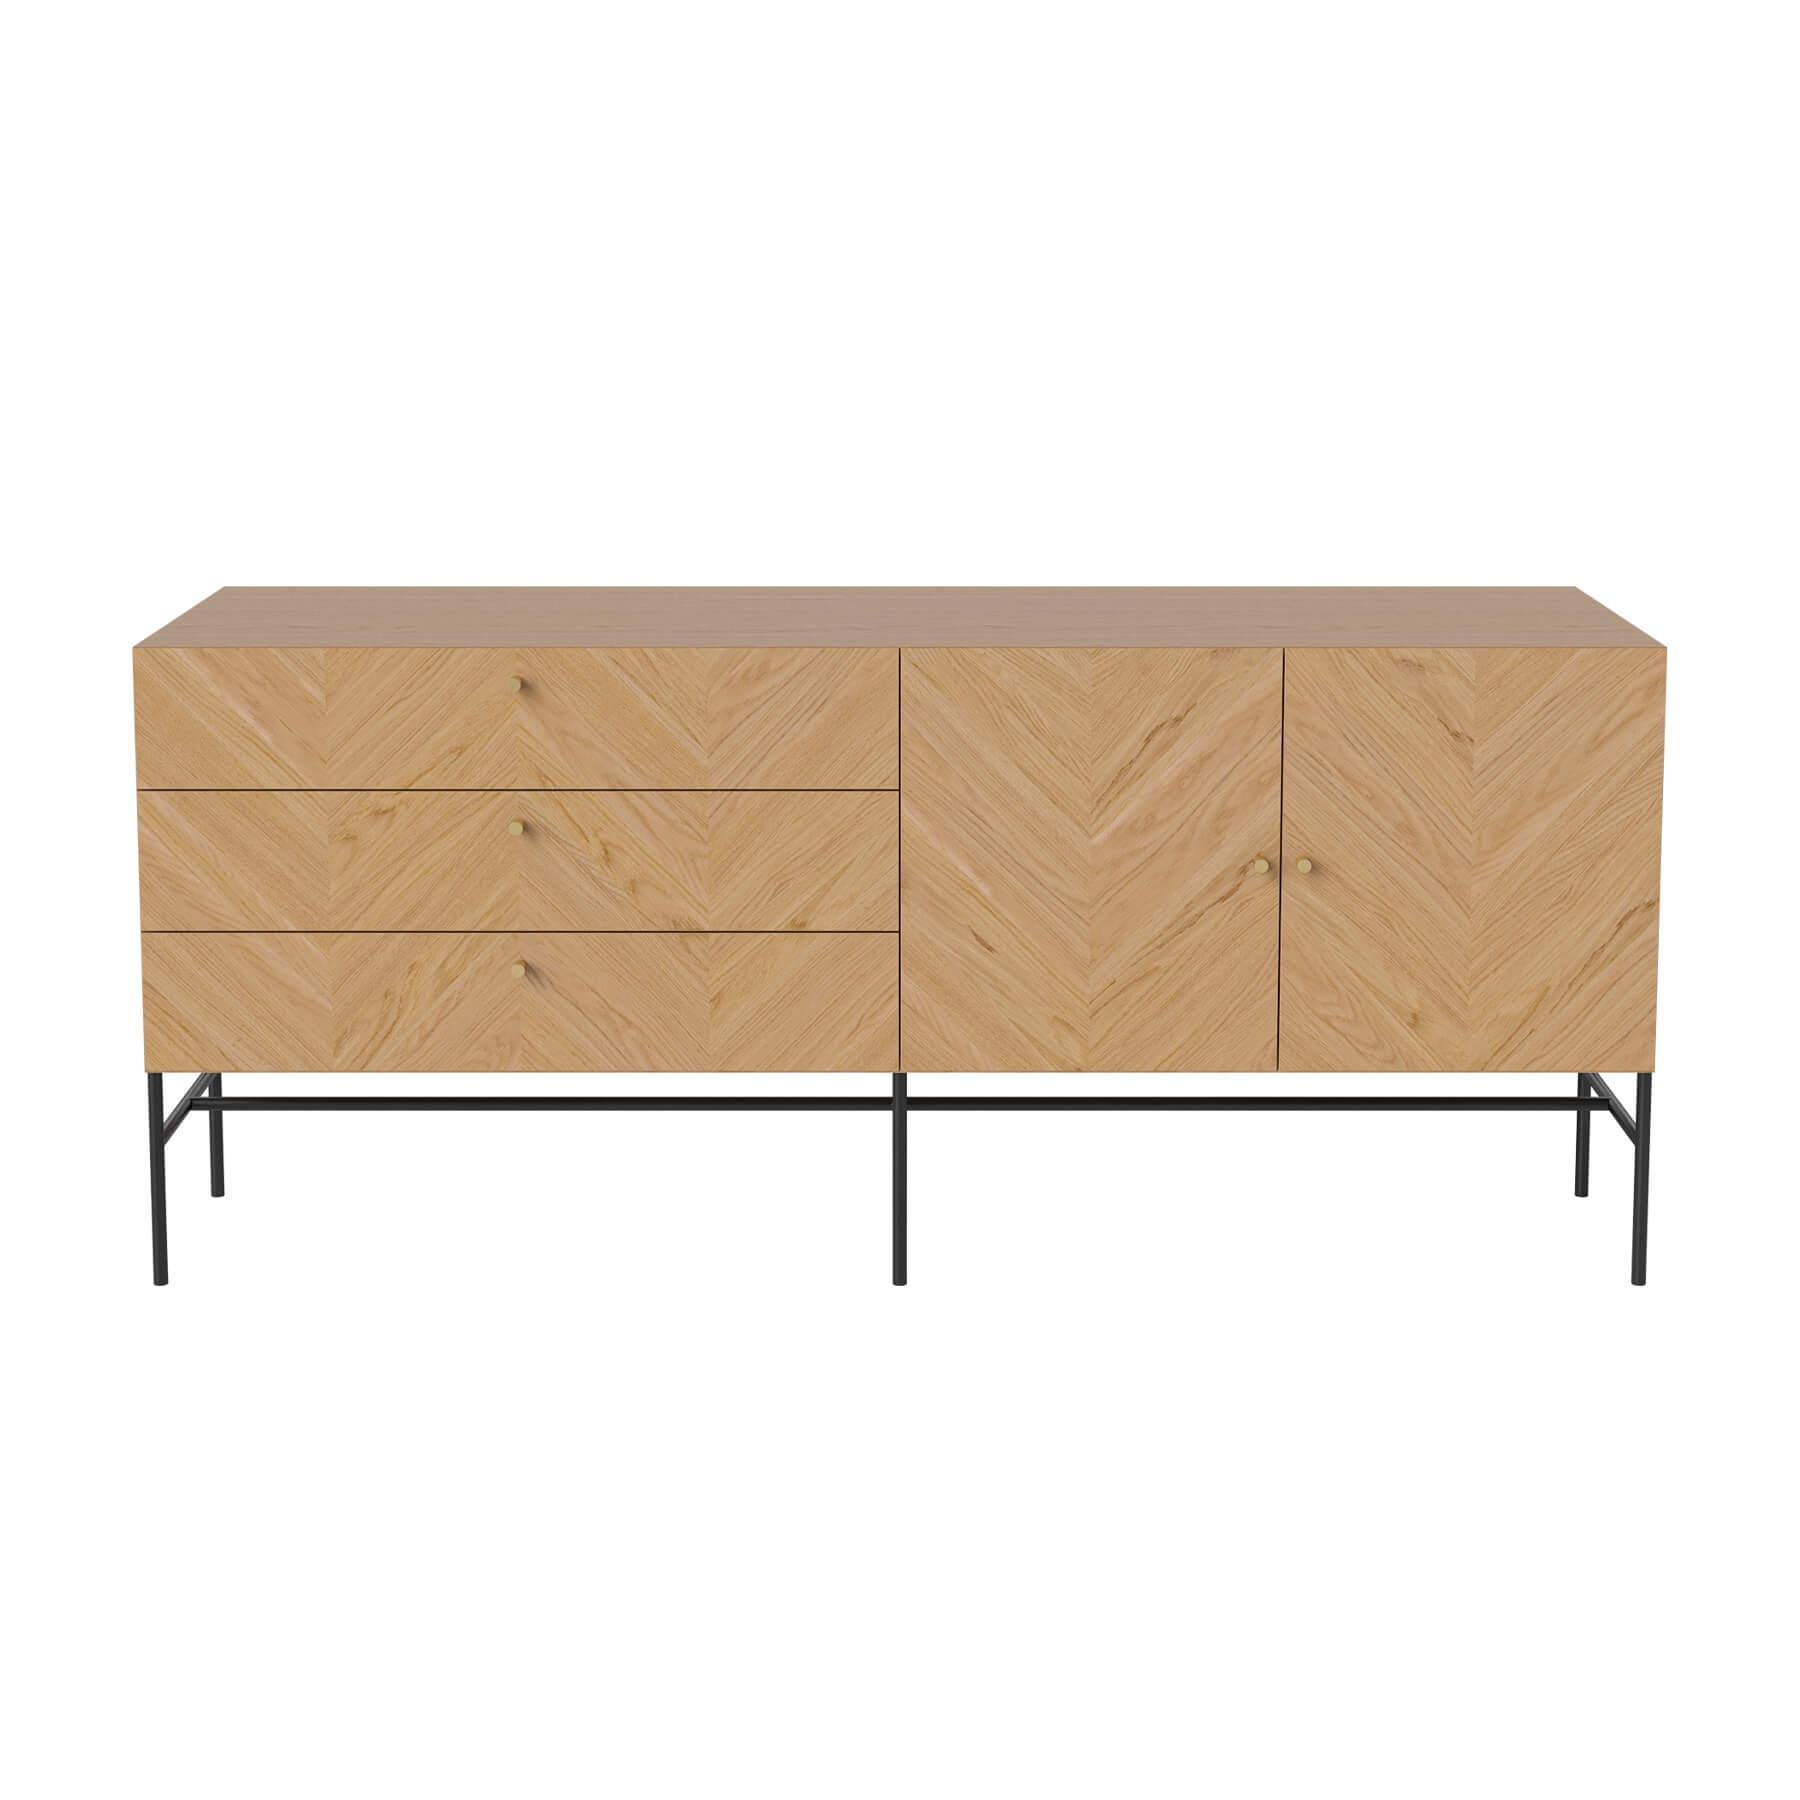 Bolia Luxe Sideboard Oiled Oak Brass Door Knobs Light Wood Designer Furniture From Holloways Of Ludlow